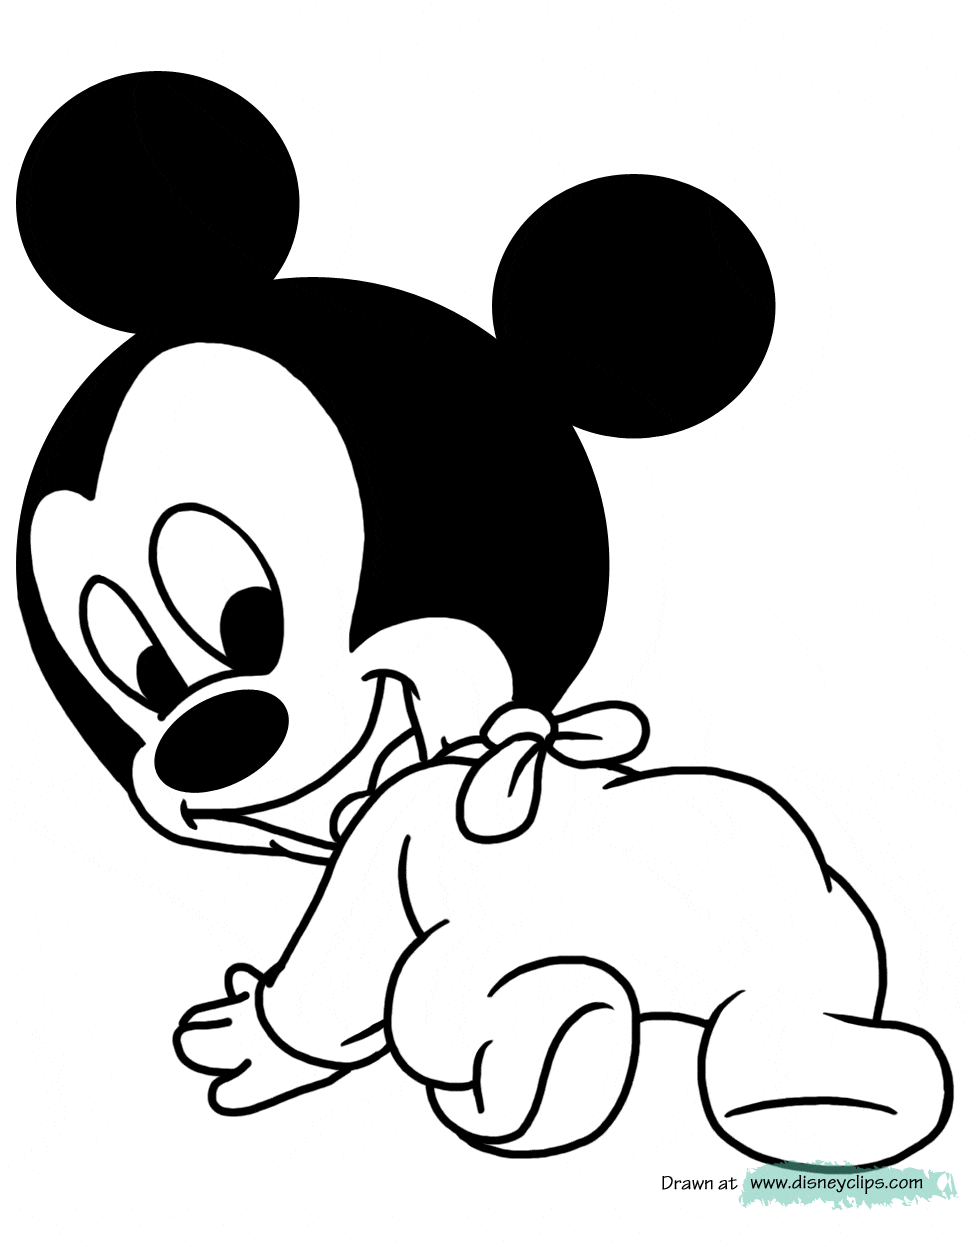 Disneybabies8 Gif 976 1 247 Pixels Baby Disney Characters Mickey Mouse Coloring Pages Baby Mickey Mouse